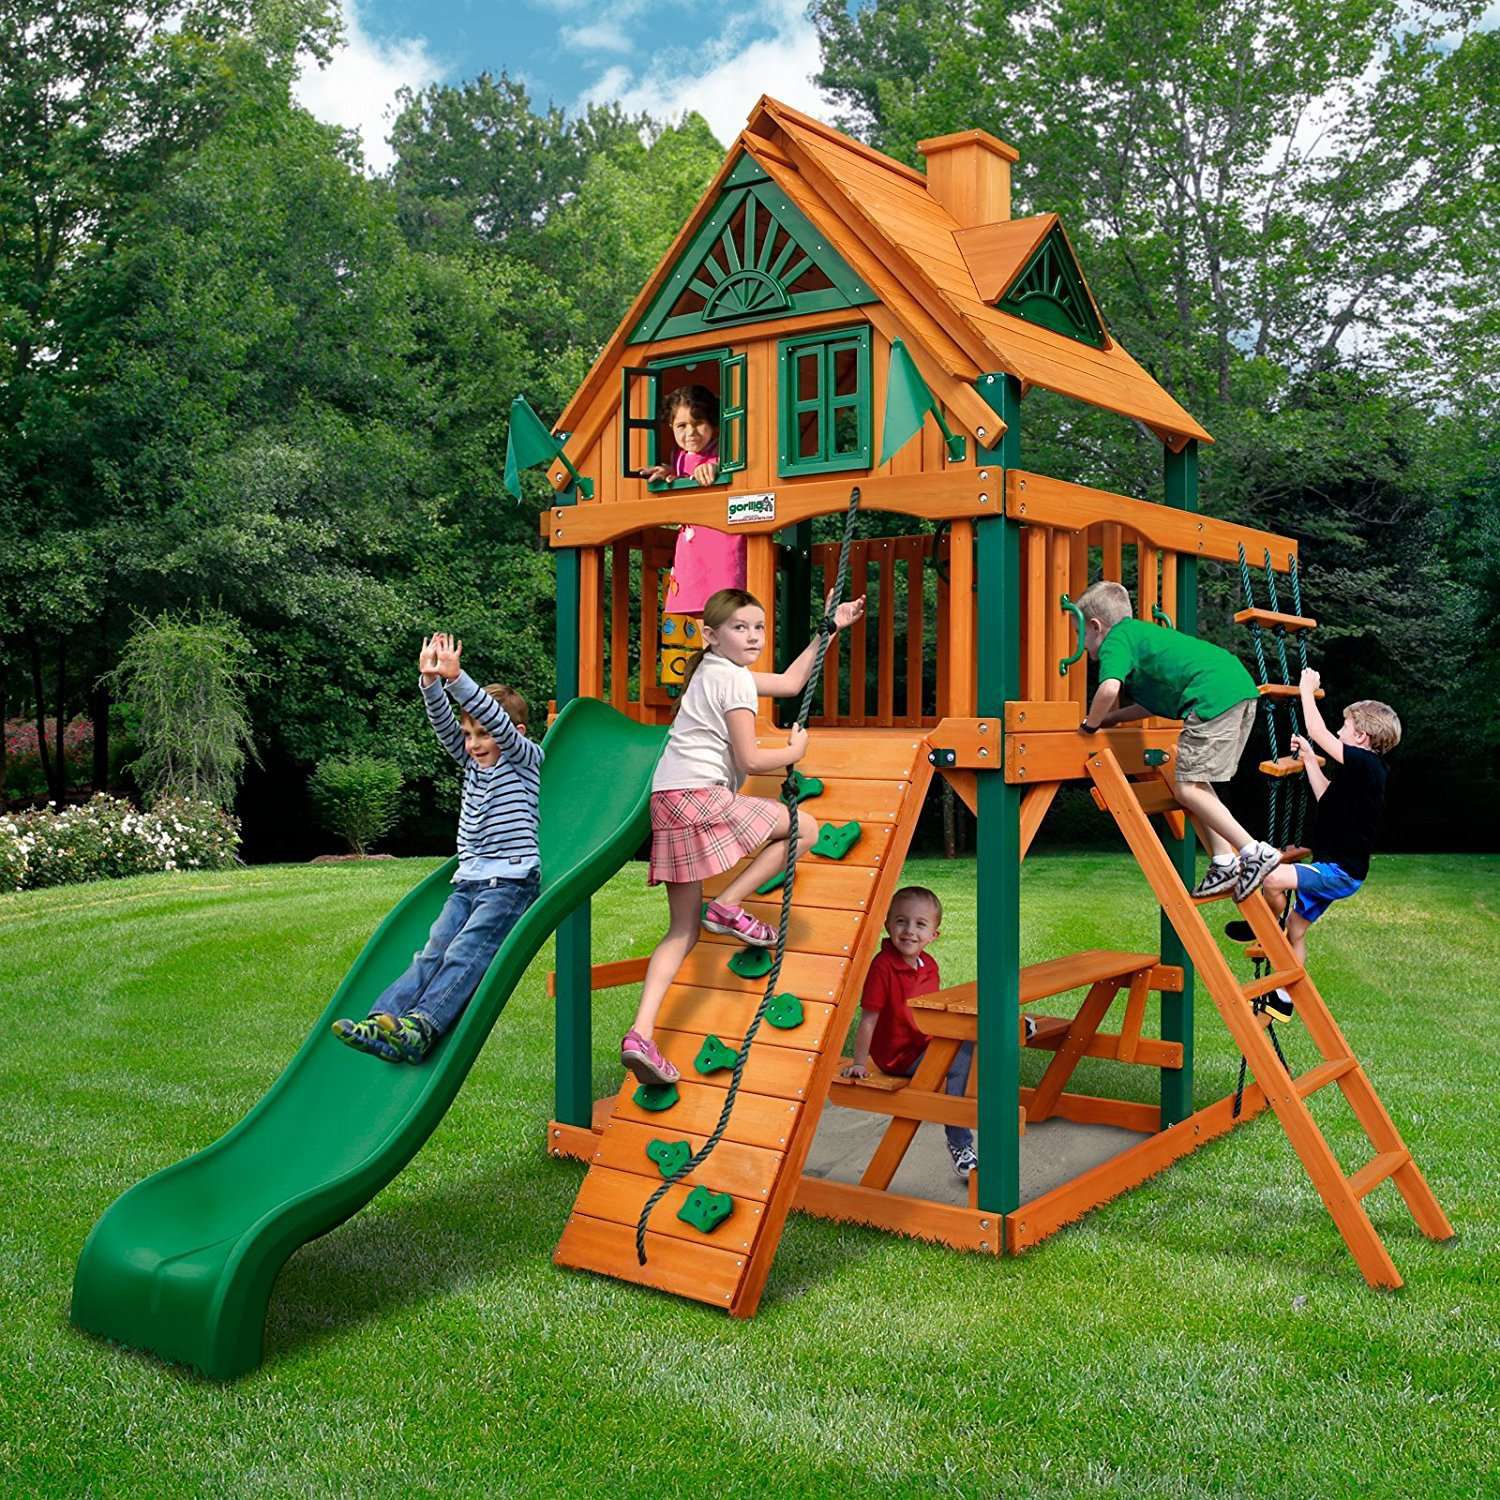 The 10 Best Wooden Swing Sets And Playsets Of 2018